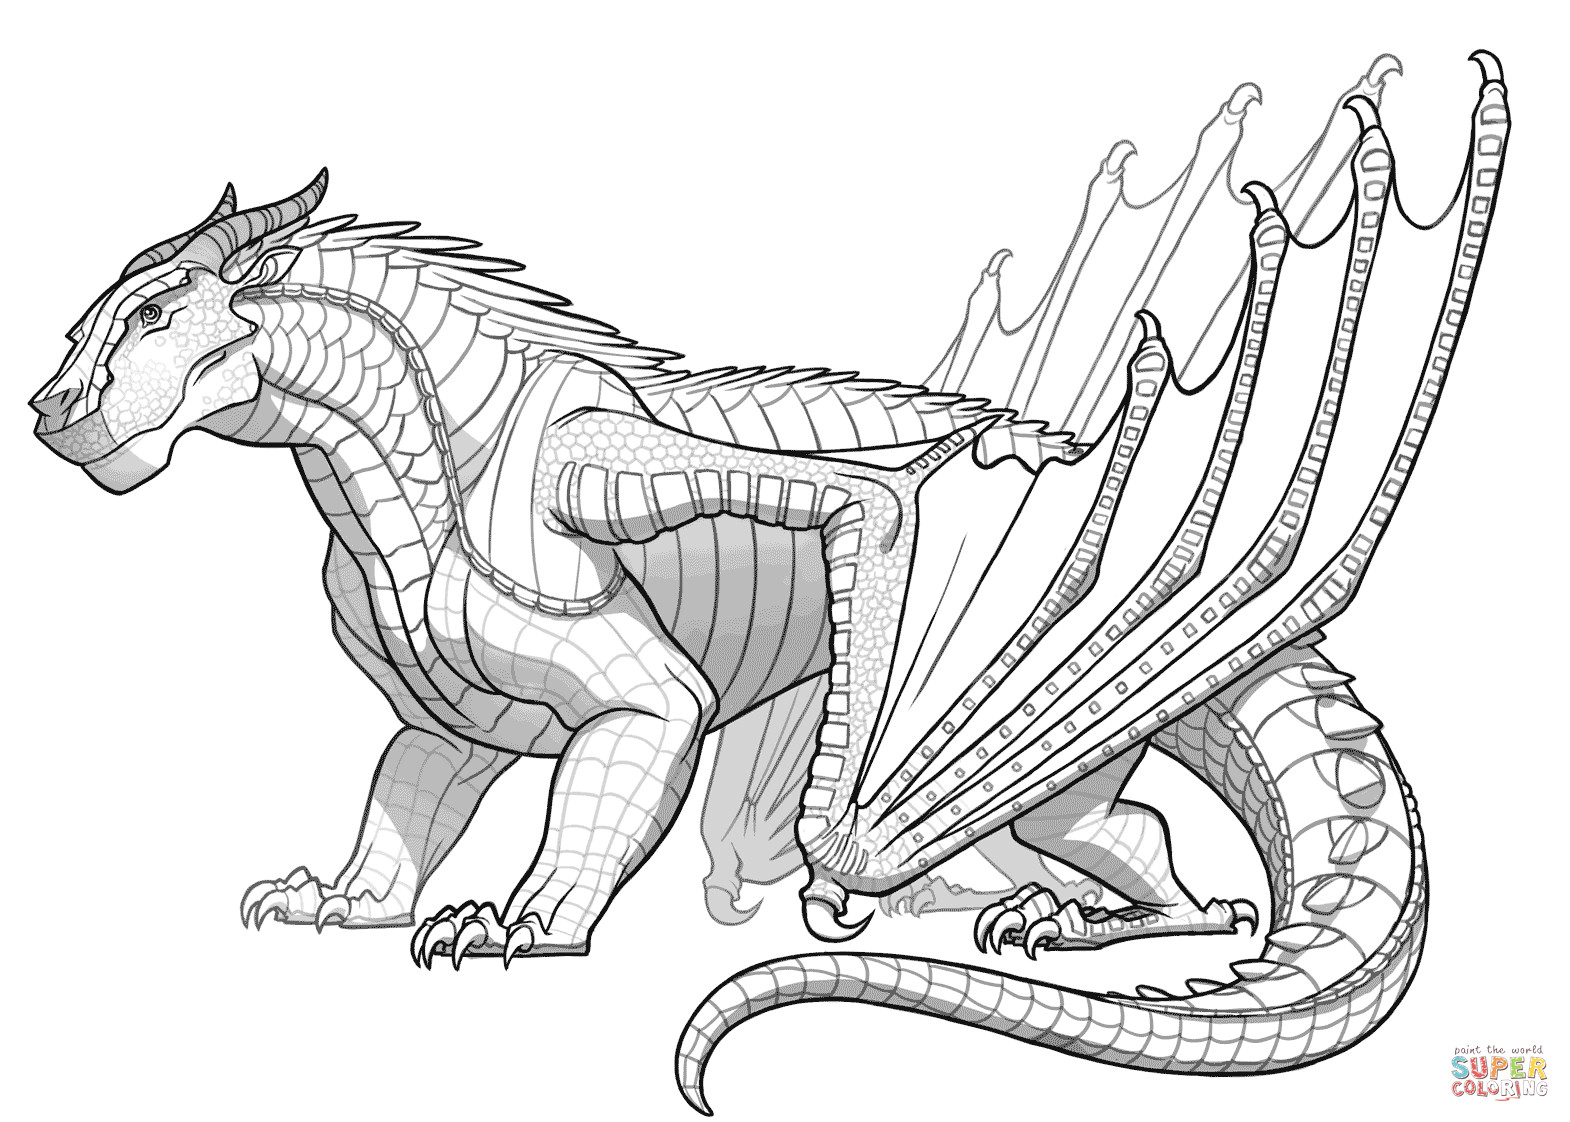 Wings Of Fire Nightwing Coloring Pages
 Mudwing Dragon from Wings of Fire coloring page